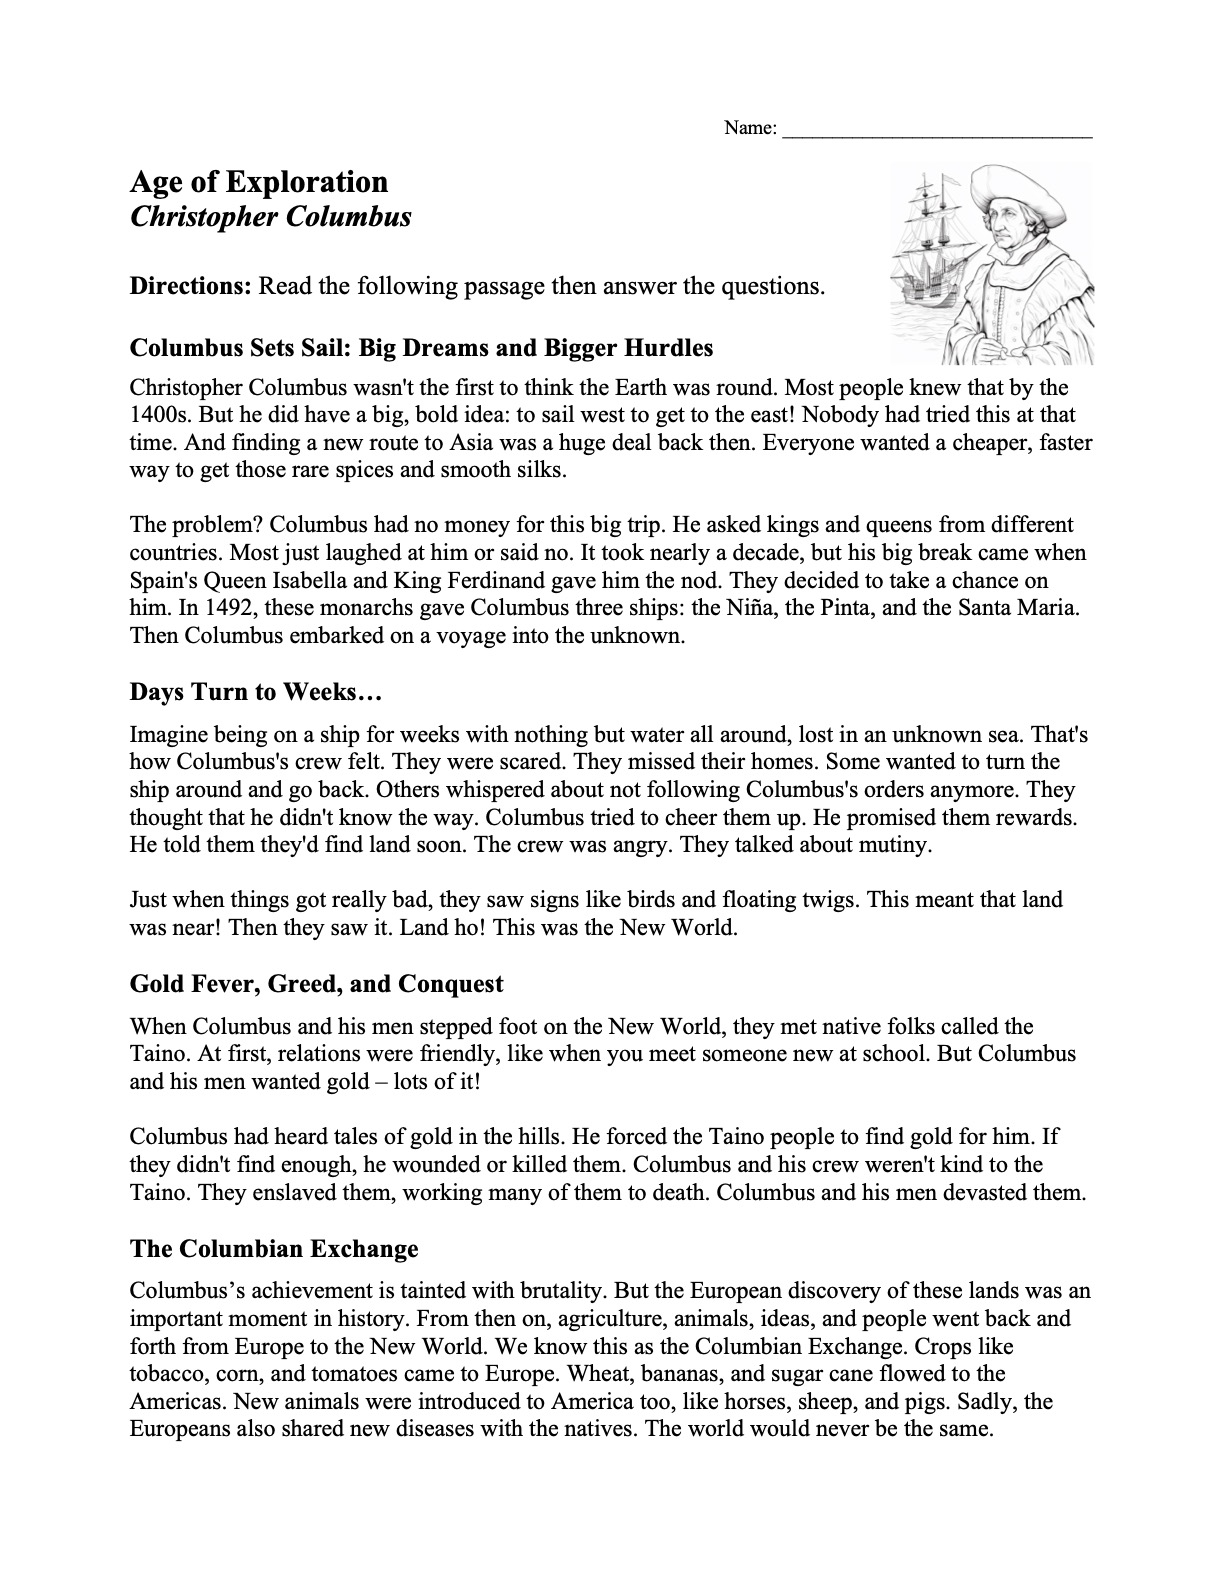 This is a preview image of our Christopher Columbus Worksheet. Click on it to enlarge this image and view the source file.